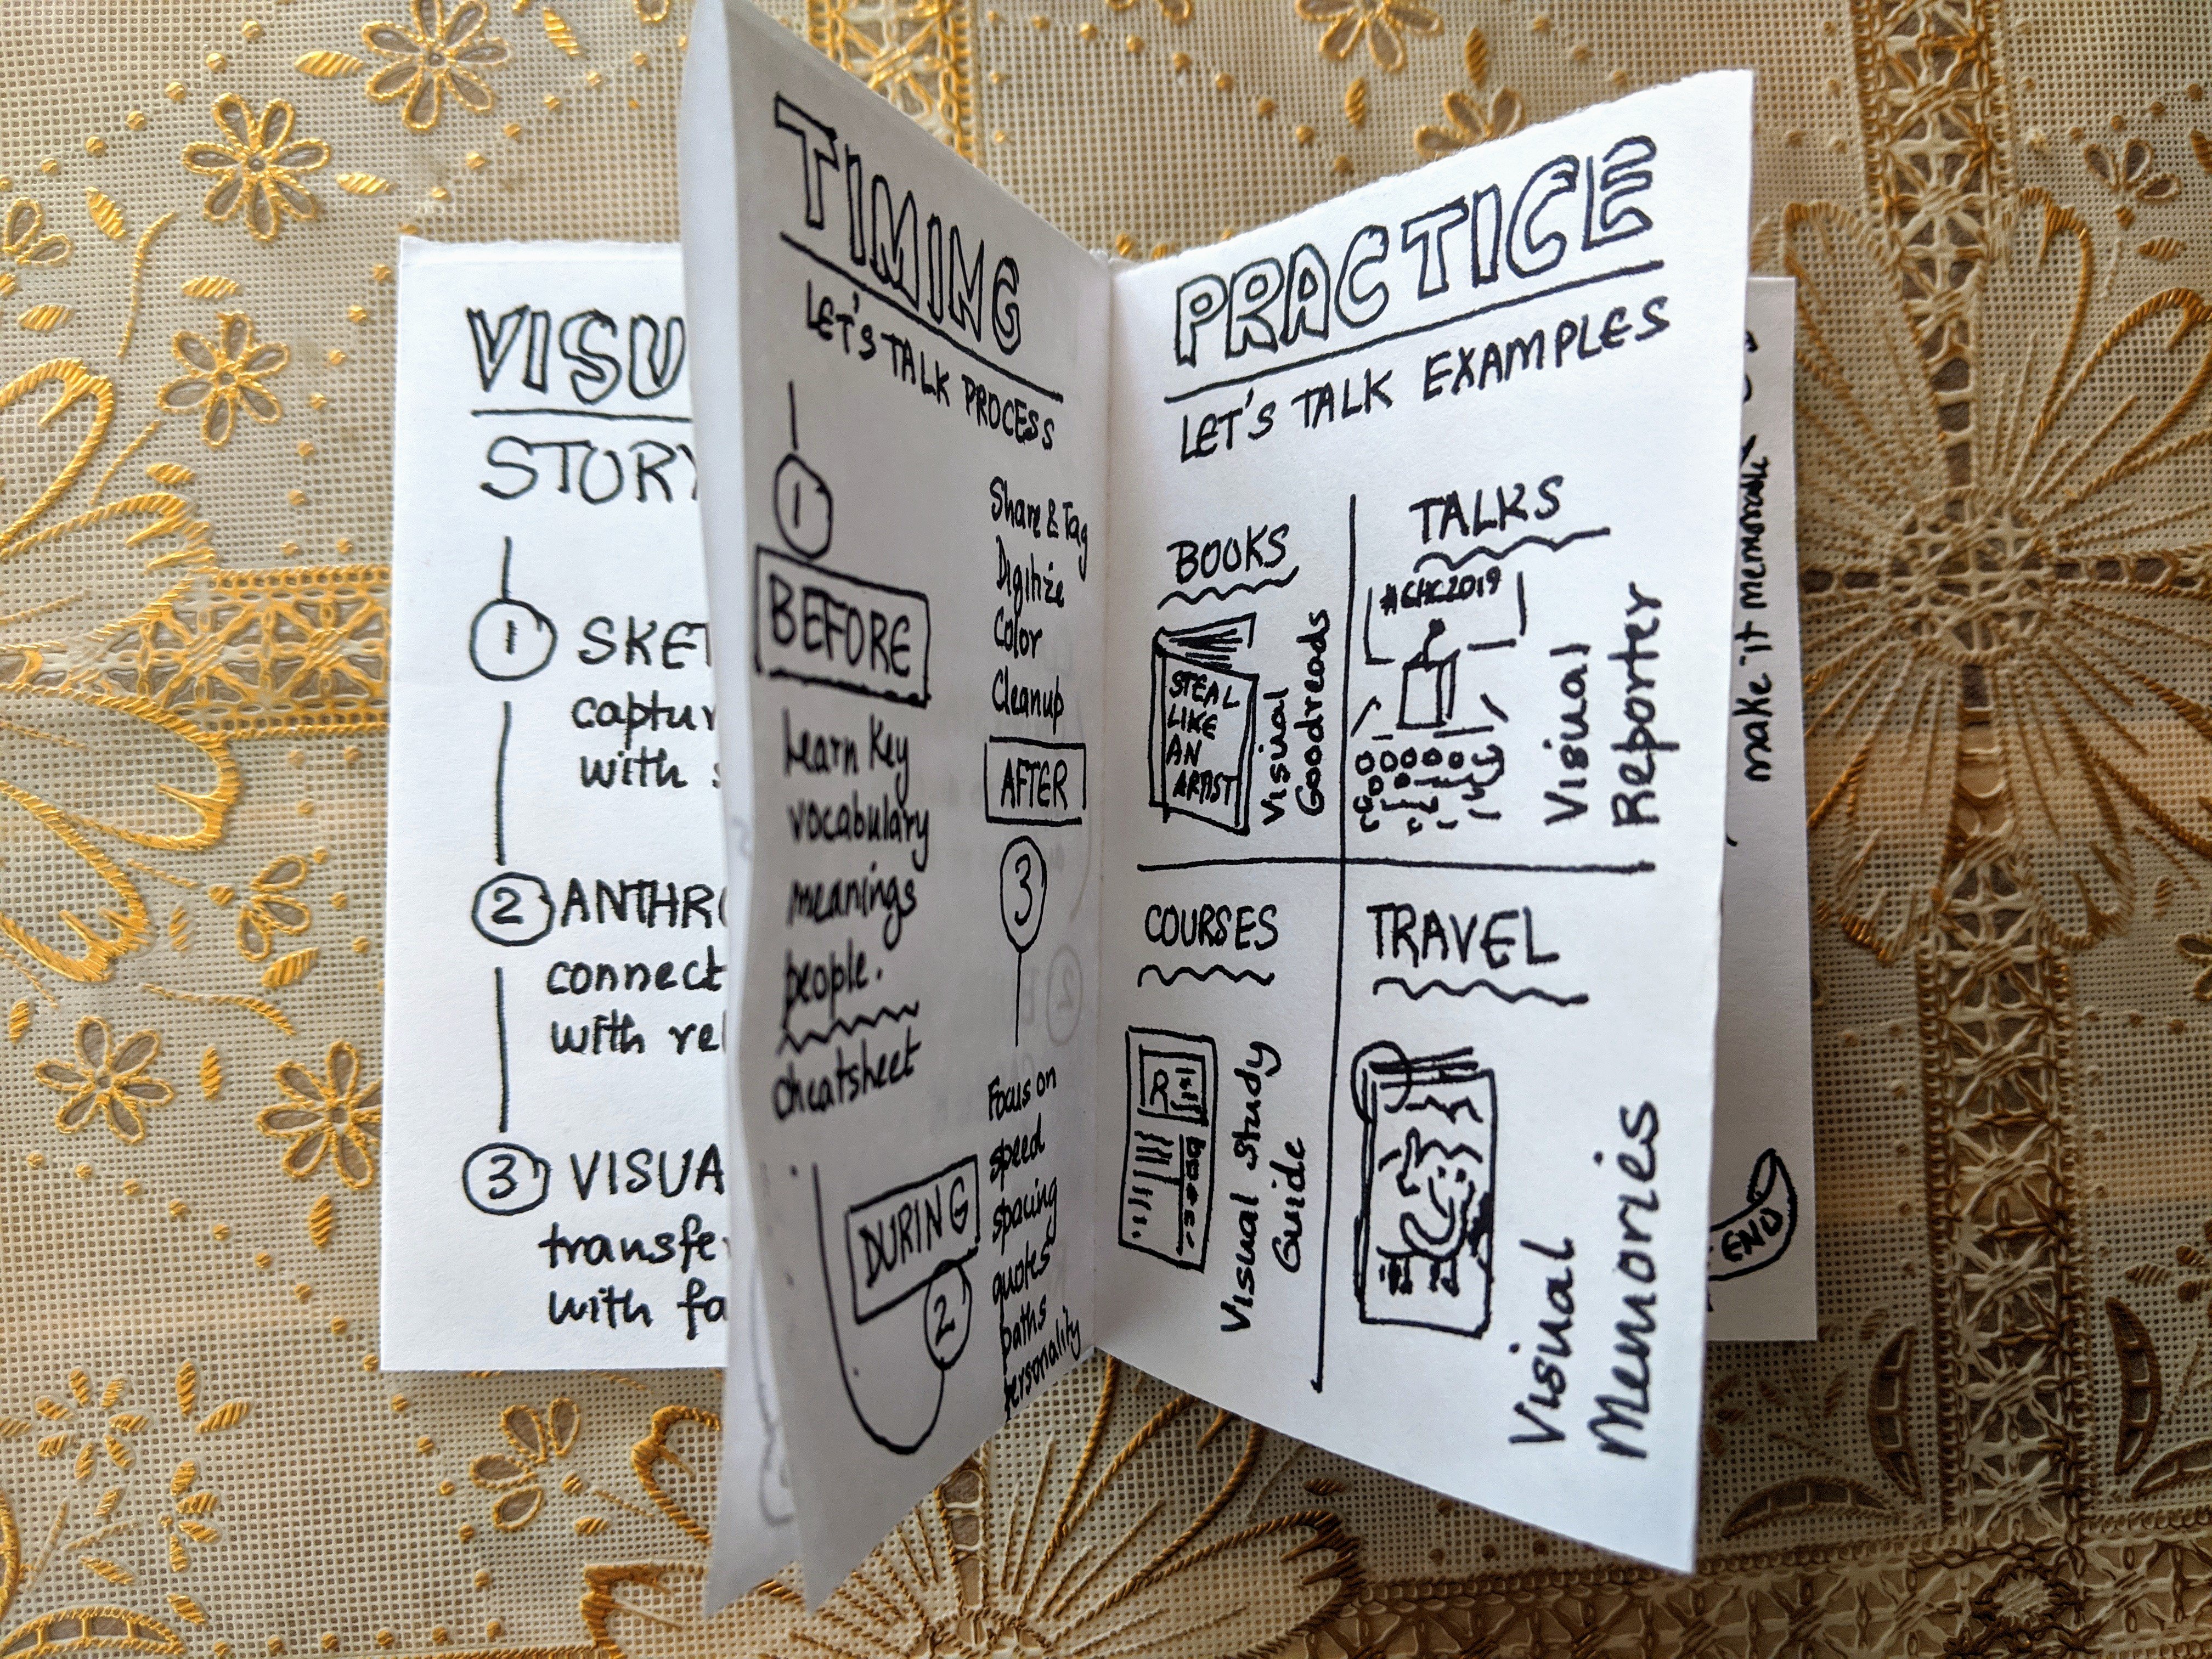 Picture of a zine with lots of sketchnote style visual explanations